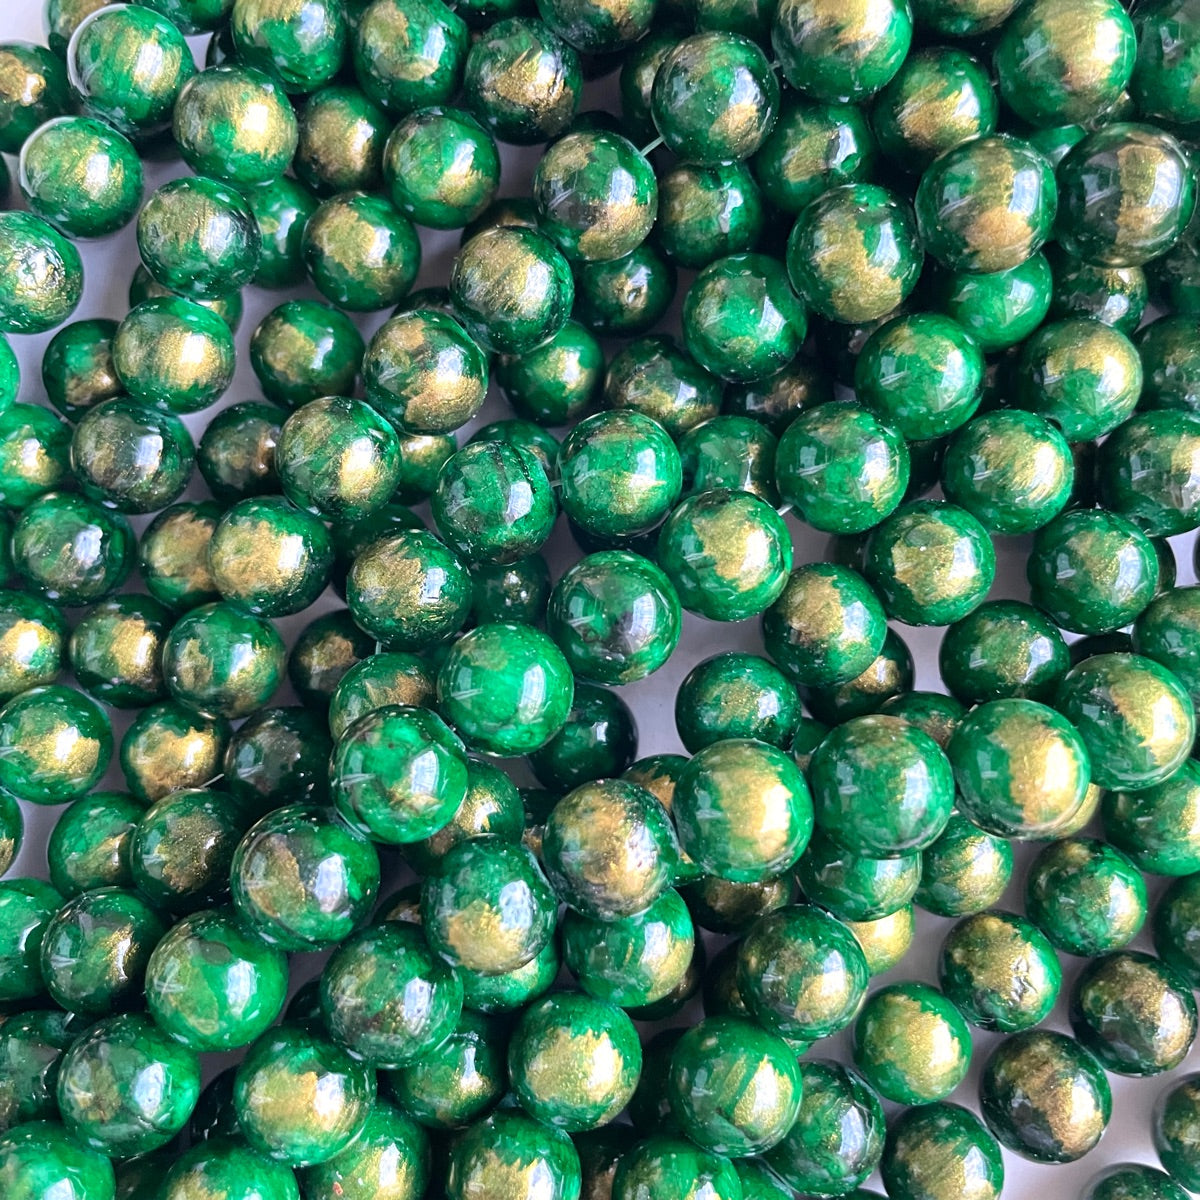 2 Strands/lot 10mm Gold-Plated Mardi Gras Color Yellow Green Purple Jade Round Stone Beads 2 Strands Green Stone Beads Mardi Gras New Beads Arrivals Round Jade Beads Charms Beads Beyond